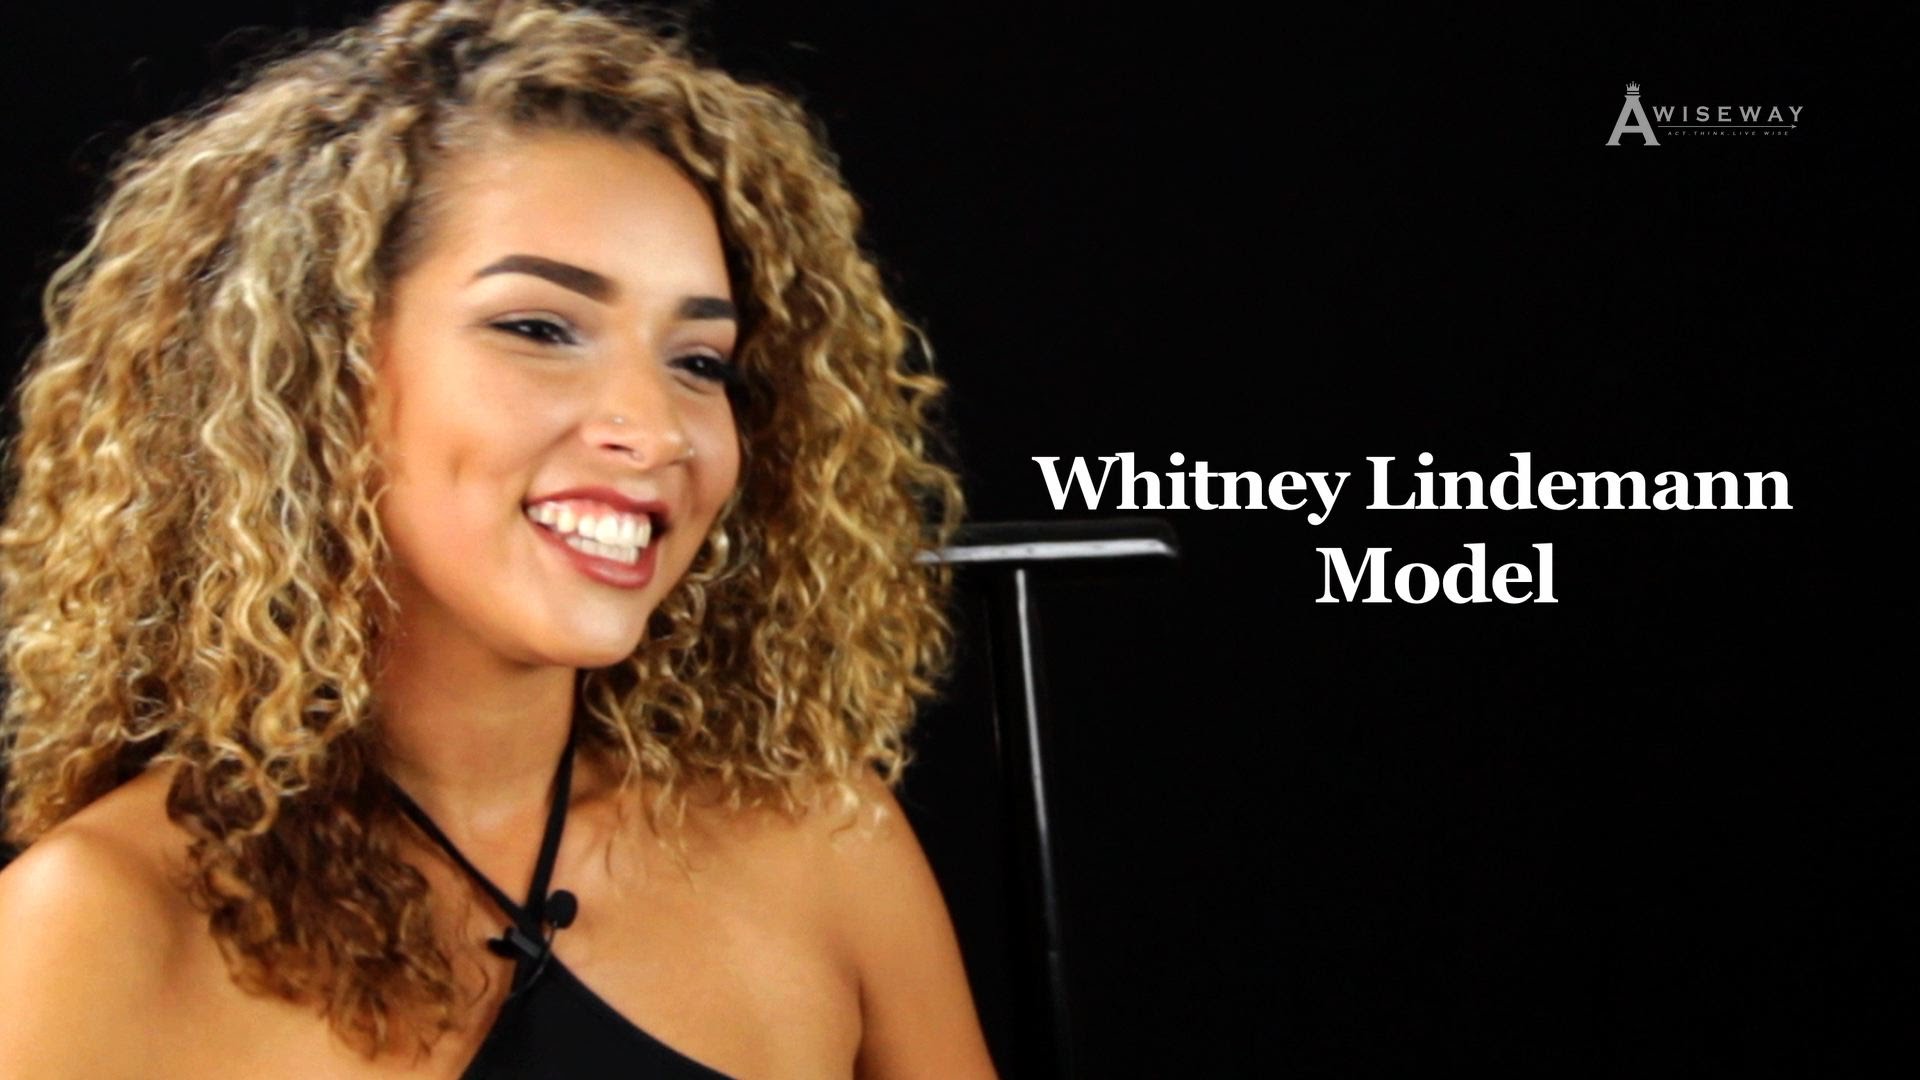 Model Explains the Importance of Knowing Self Worth in the Industry